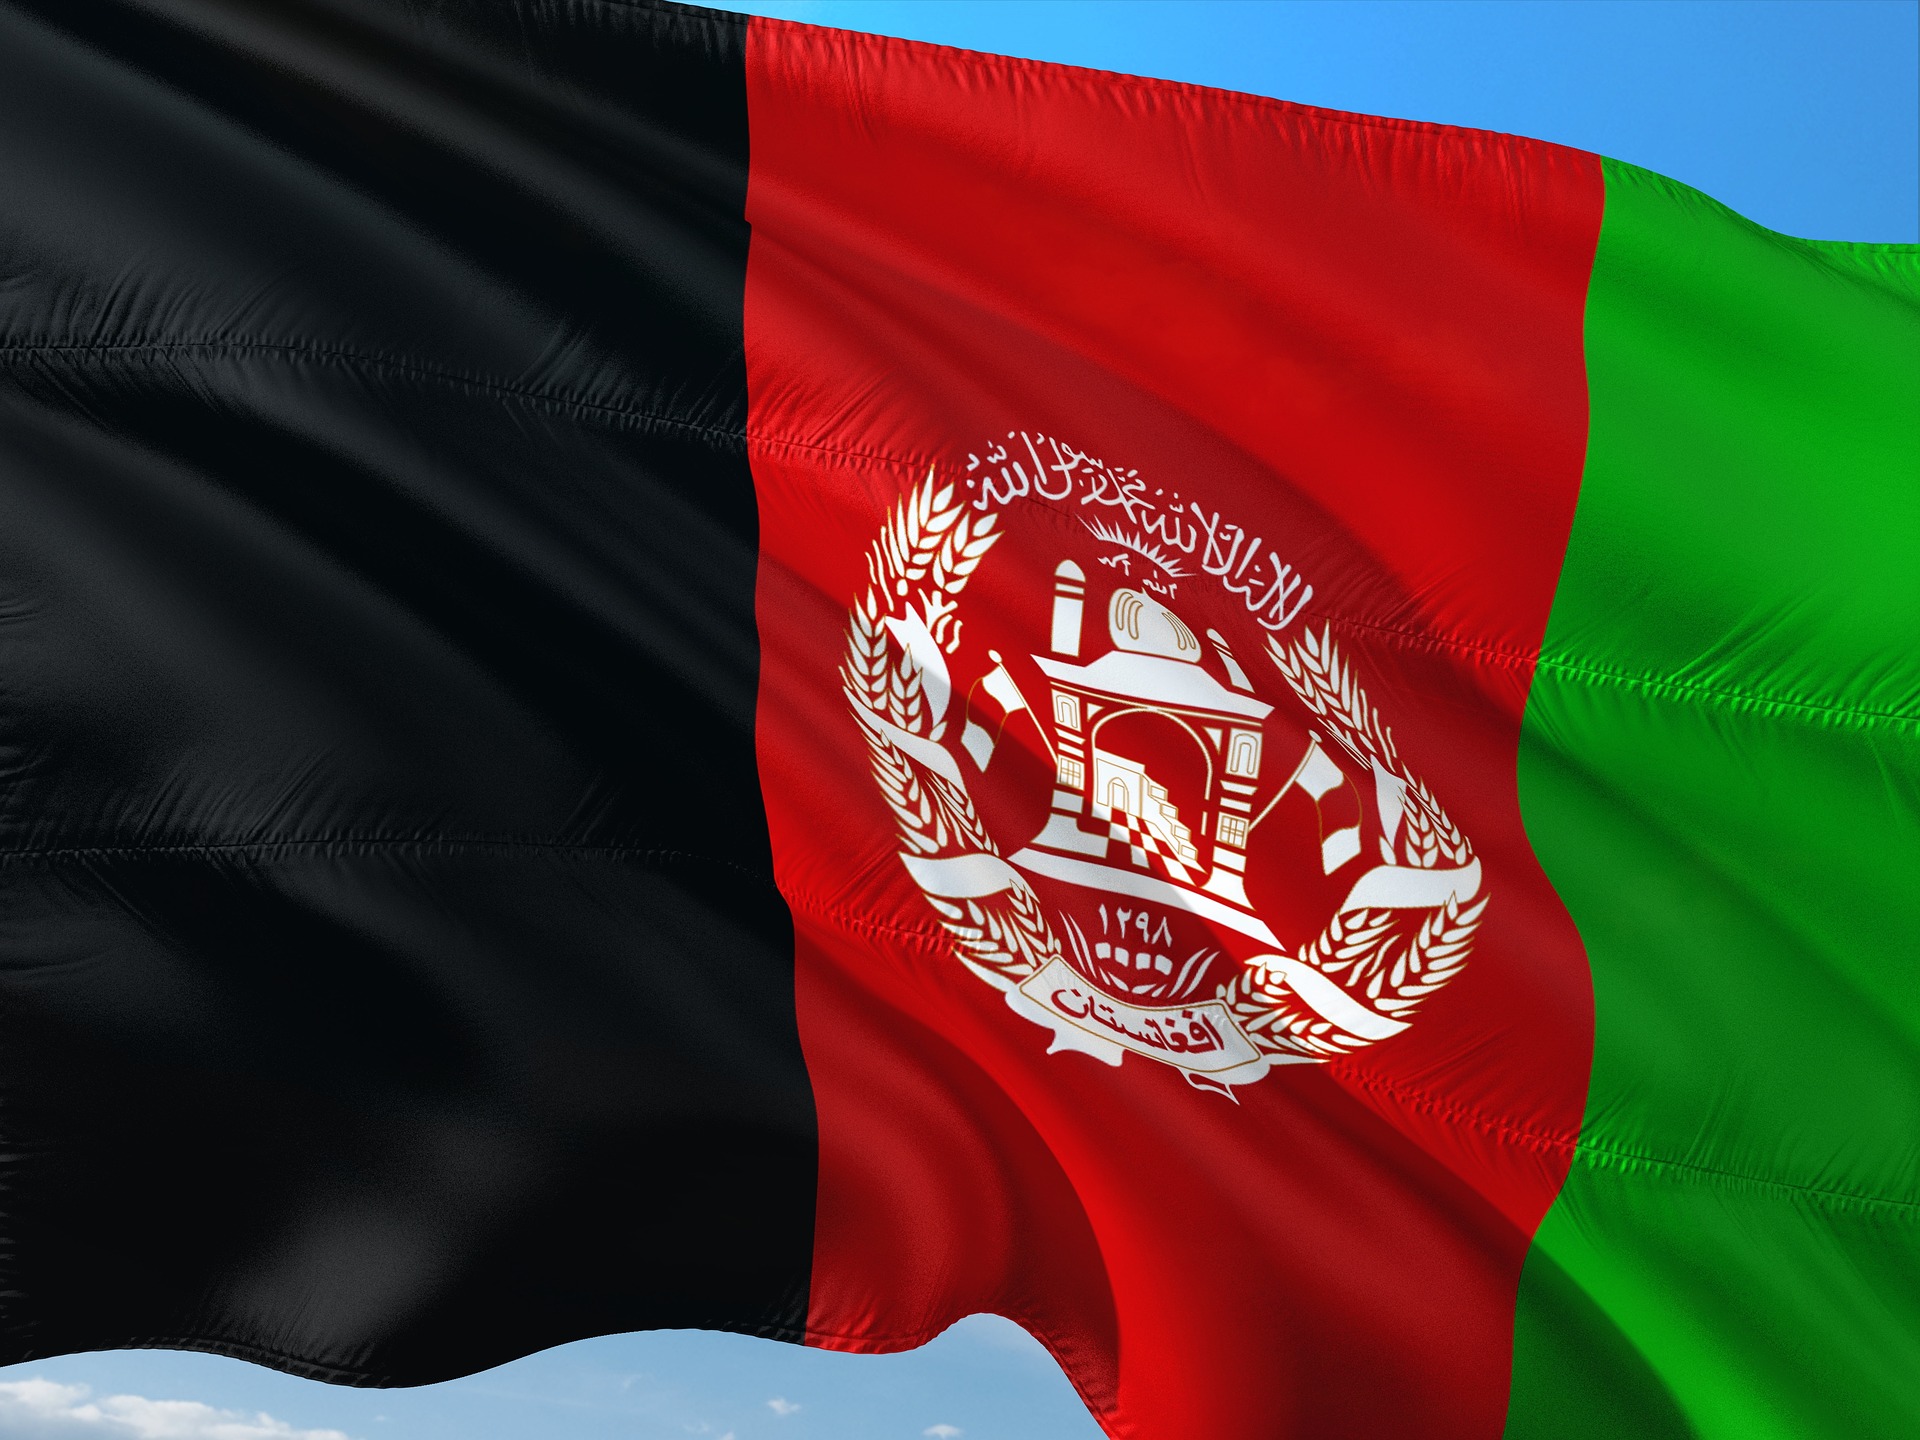 Peace talks: What to expect from intra-Afghan negotiations?